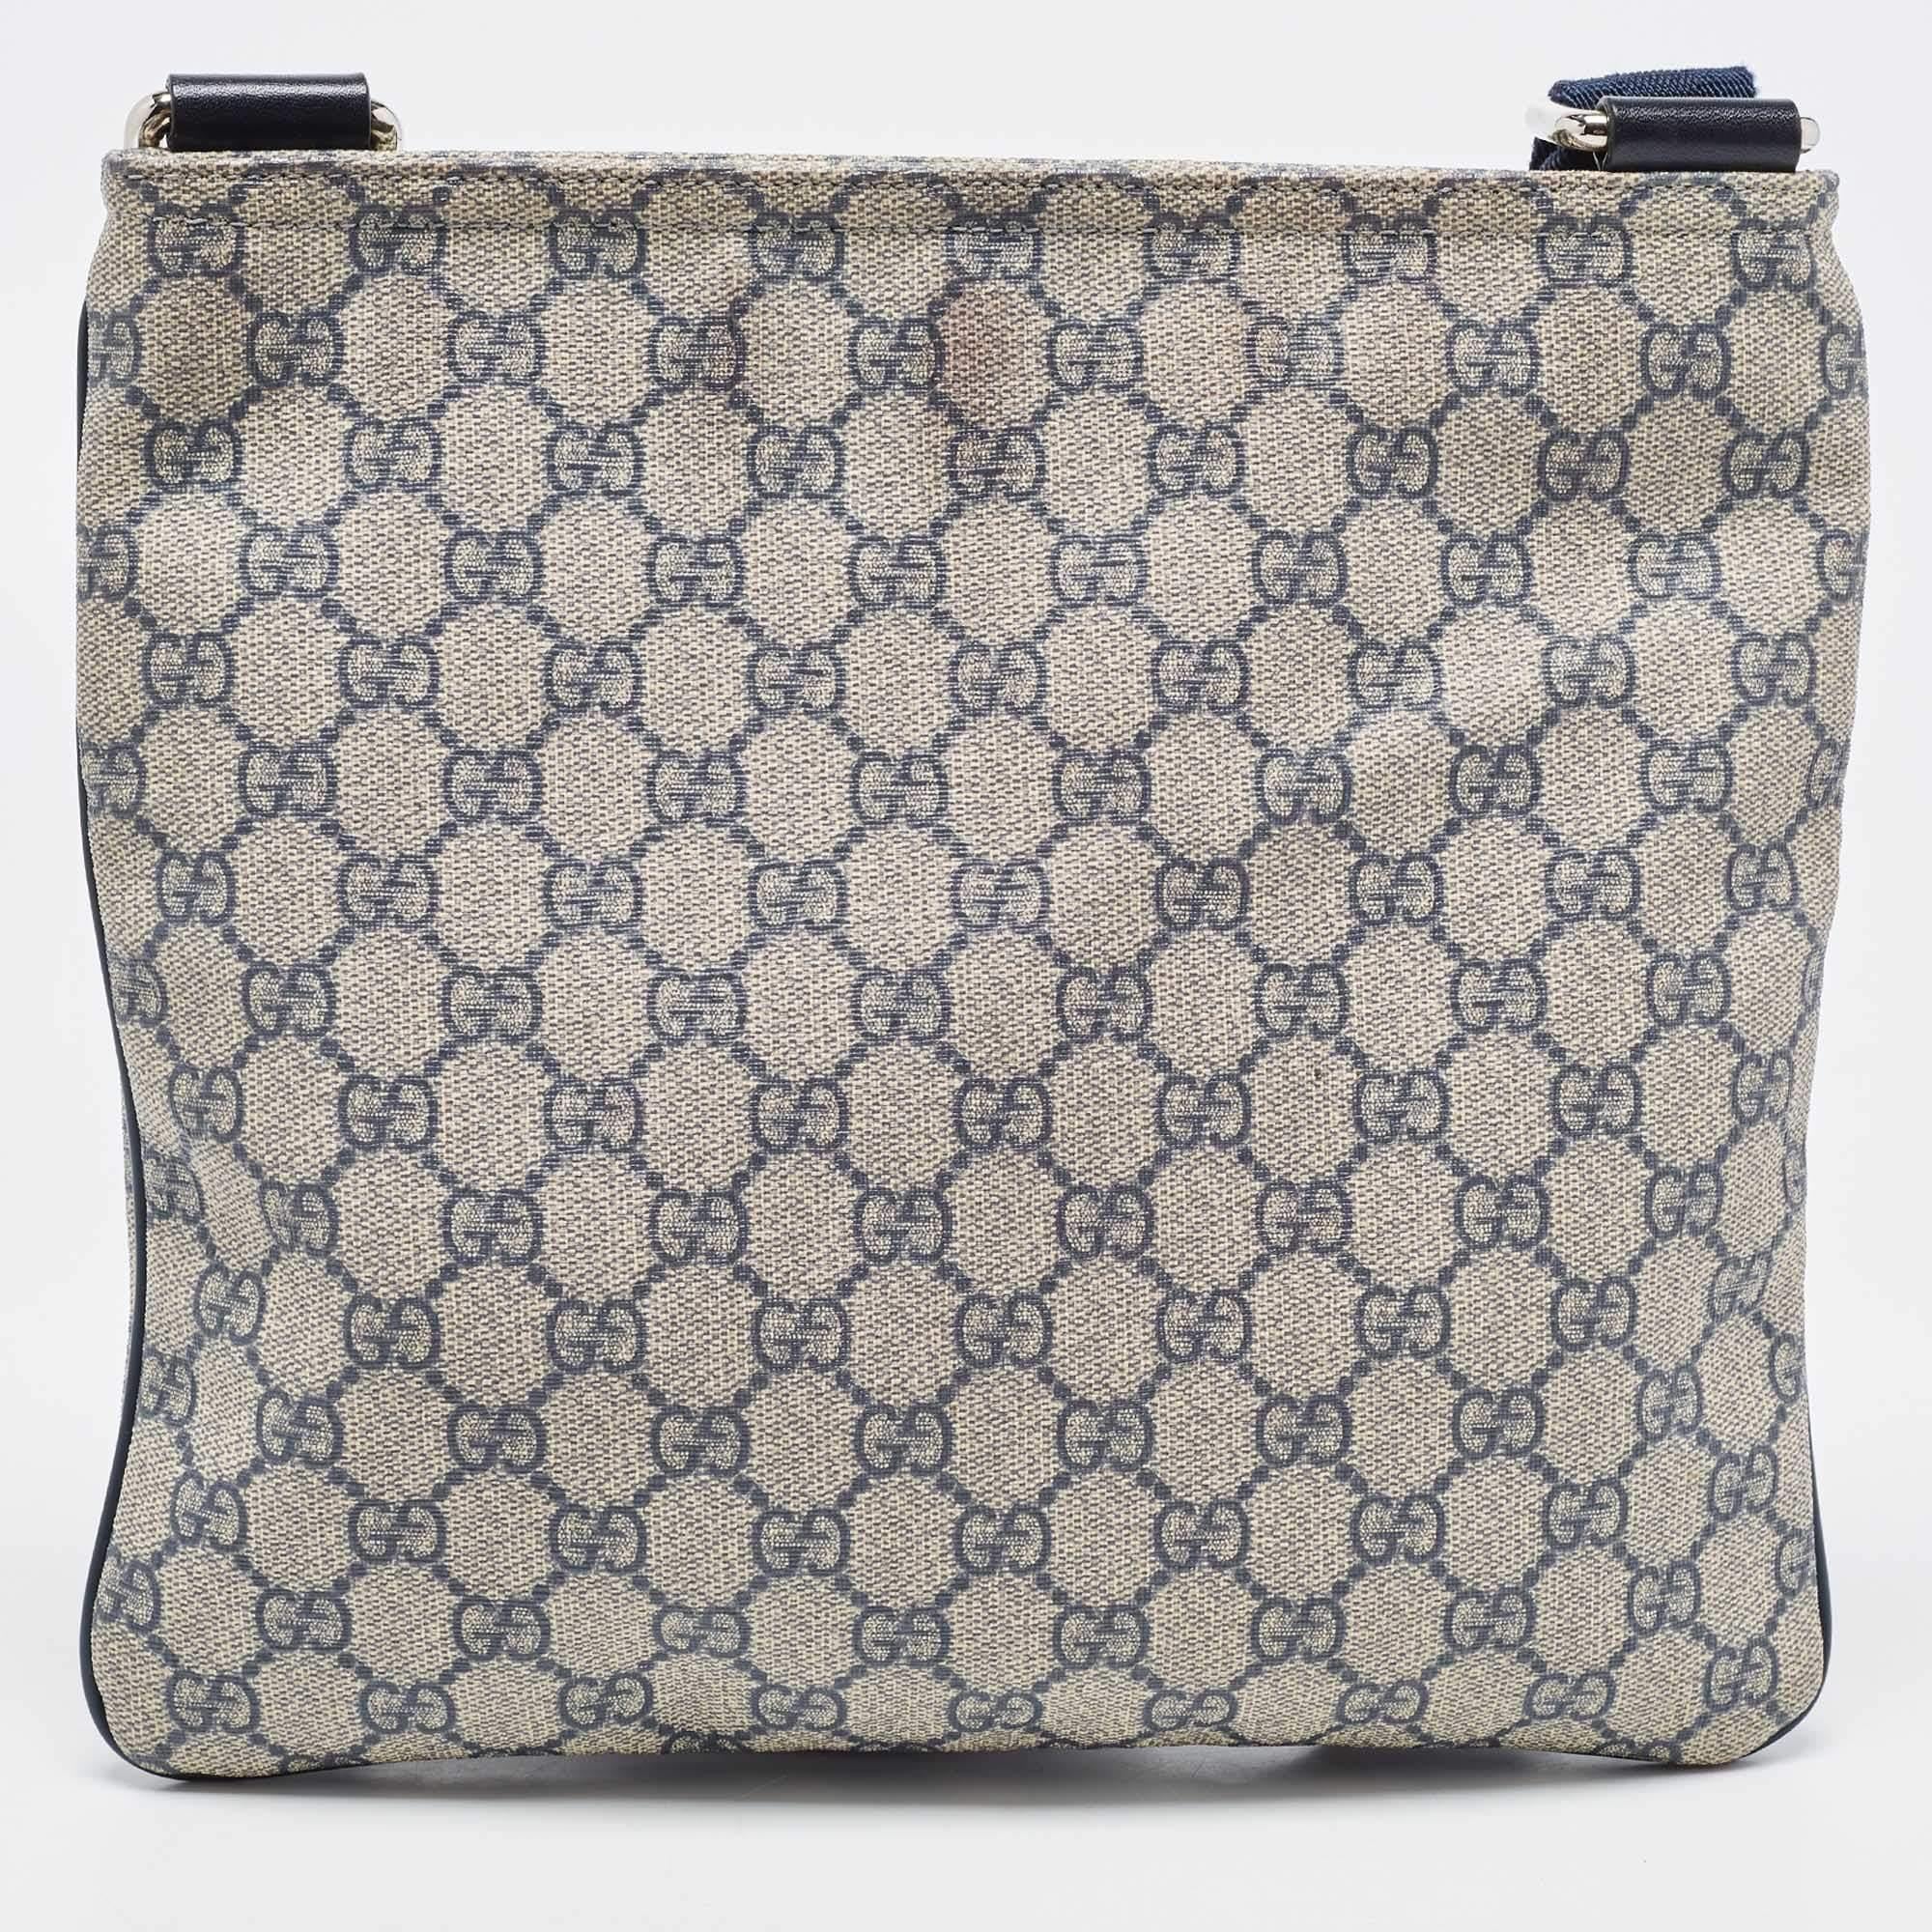 Gucci Grey/Blue GG Supreme Canvas and Leather Crossbody Bag 5